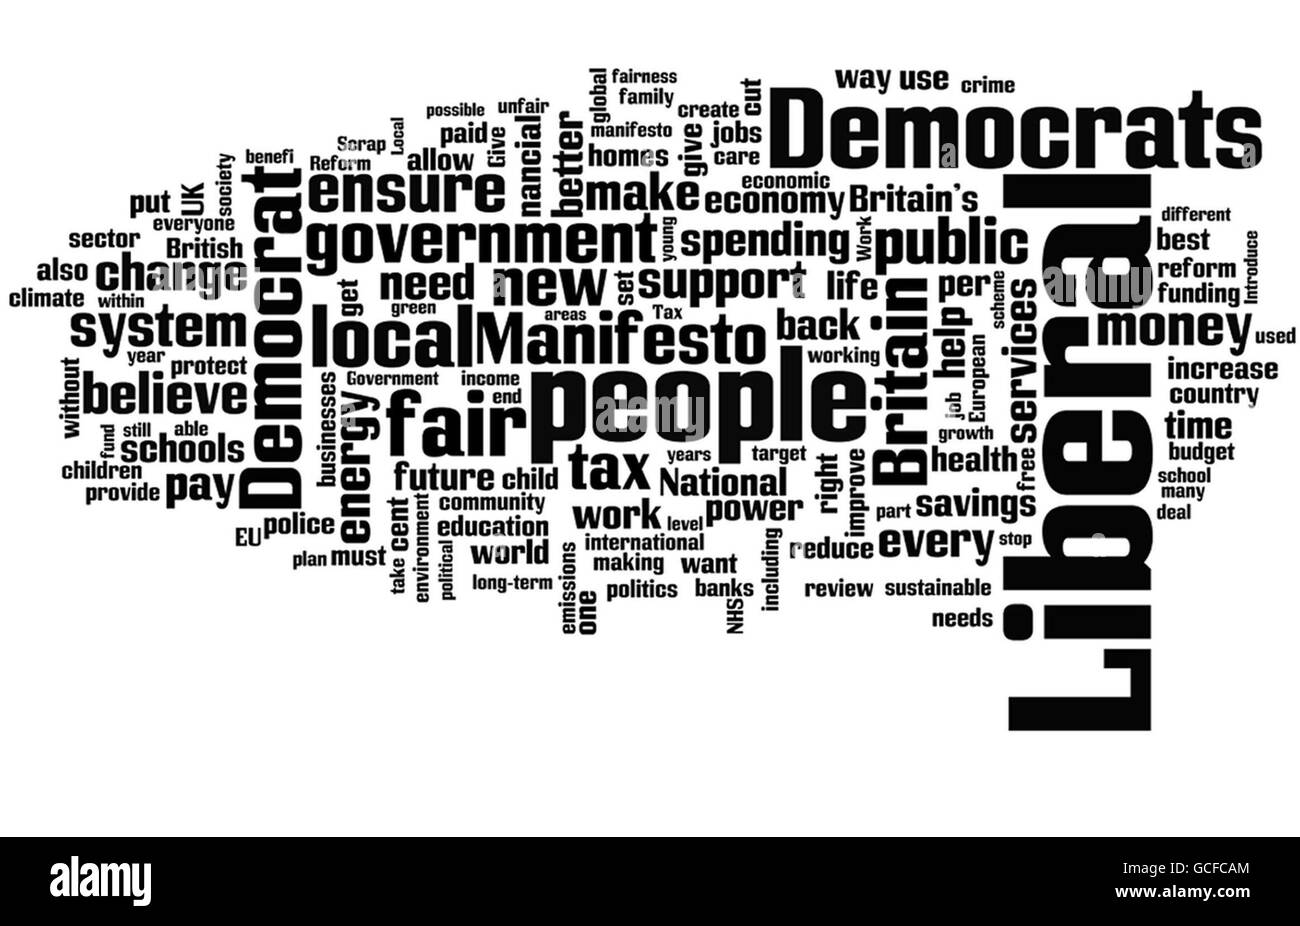 The Liberal Democrat Party manifesto as seen through the internet tool wordle.net. The use of words in the three main manifestos offers an insight into the political lexicon parties hope will influence voters. Stock Photo